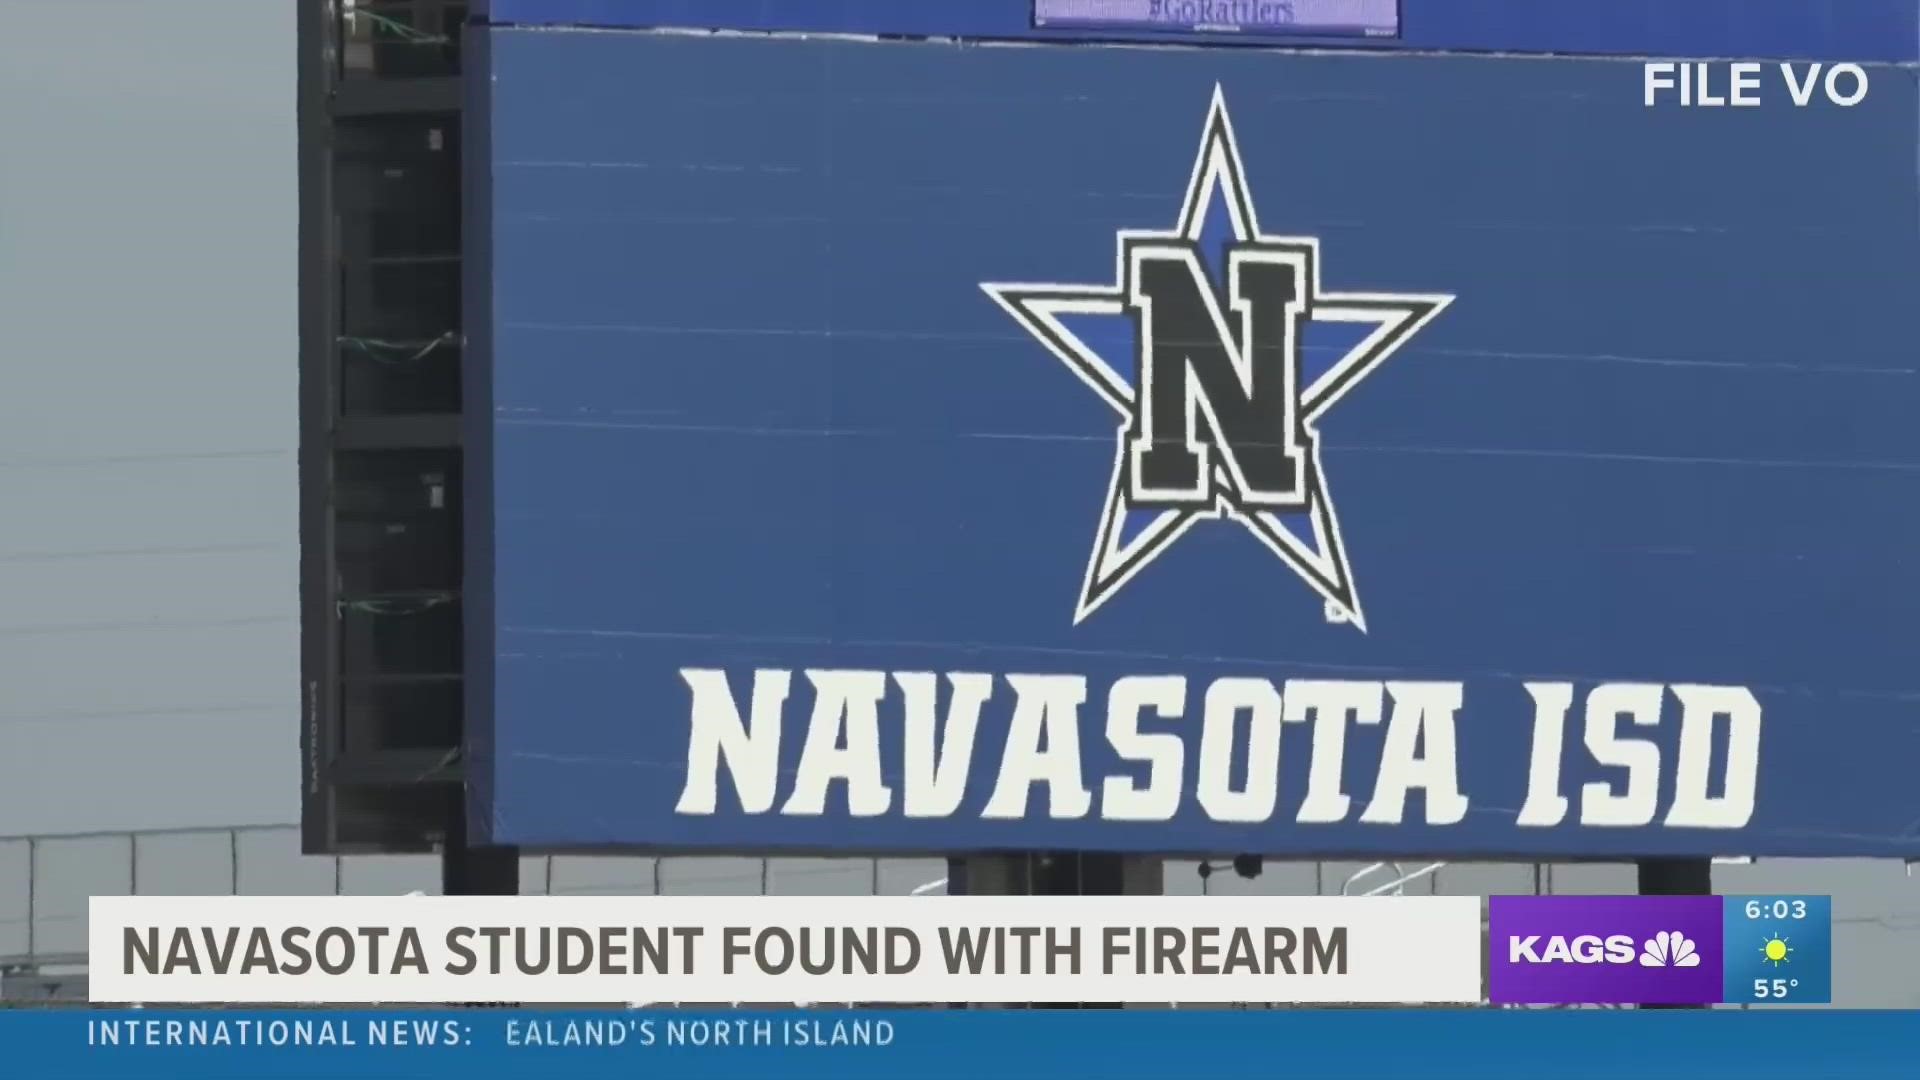 Navasota ISD have confirmed in a press release that the picture was taken at Navasota Jr. High, but were not able to confirm the time that the picture was taken.